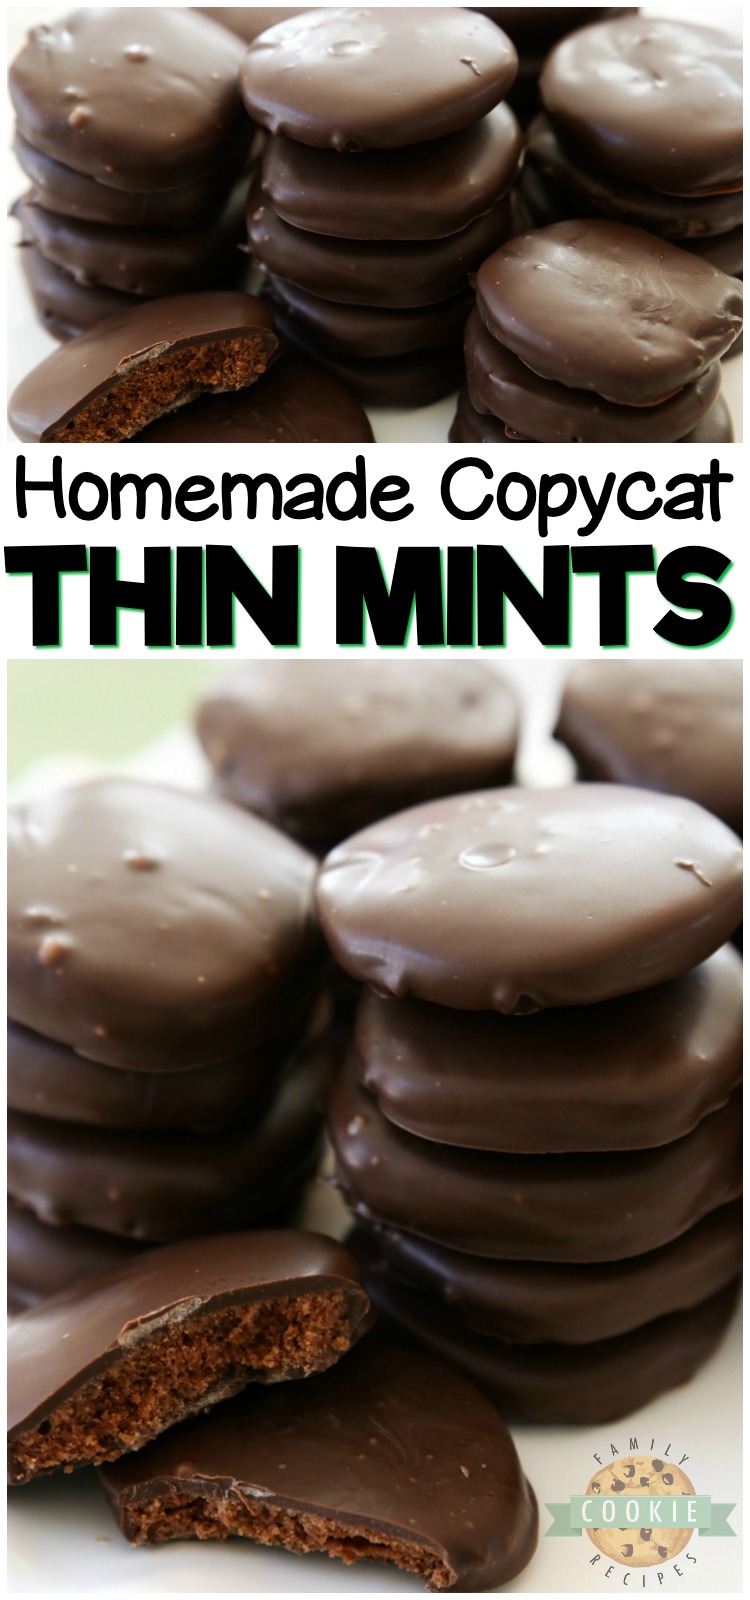 Thin Mints Cookies made with homemade buttery chocolate cookies dipped in mint fudge glaze. This simple recipe for copycat Thin Mints tastes even better than the original! #thinmints #thinmint #cookies #girlscout #baking #copycat #dessert #recipe from FAMILY COOKIE RECIPES